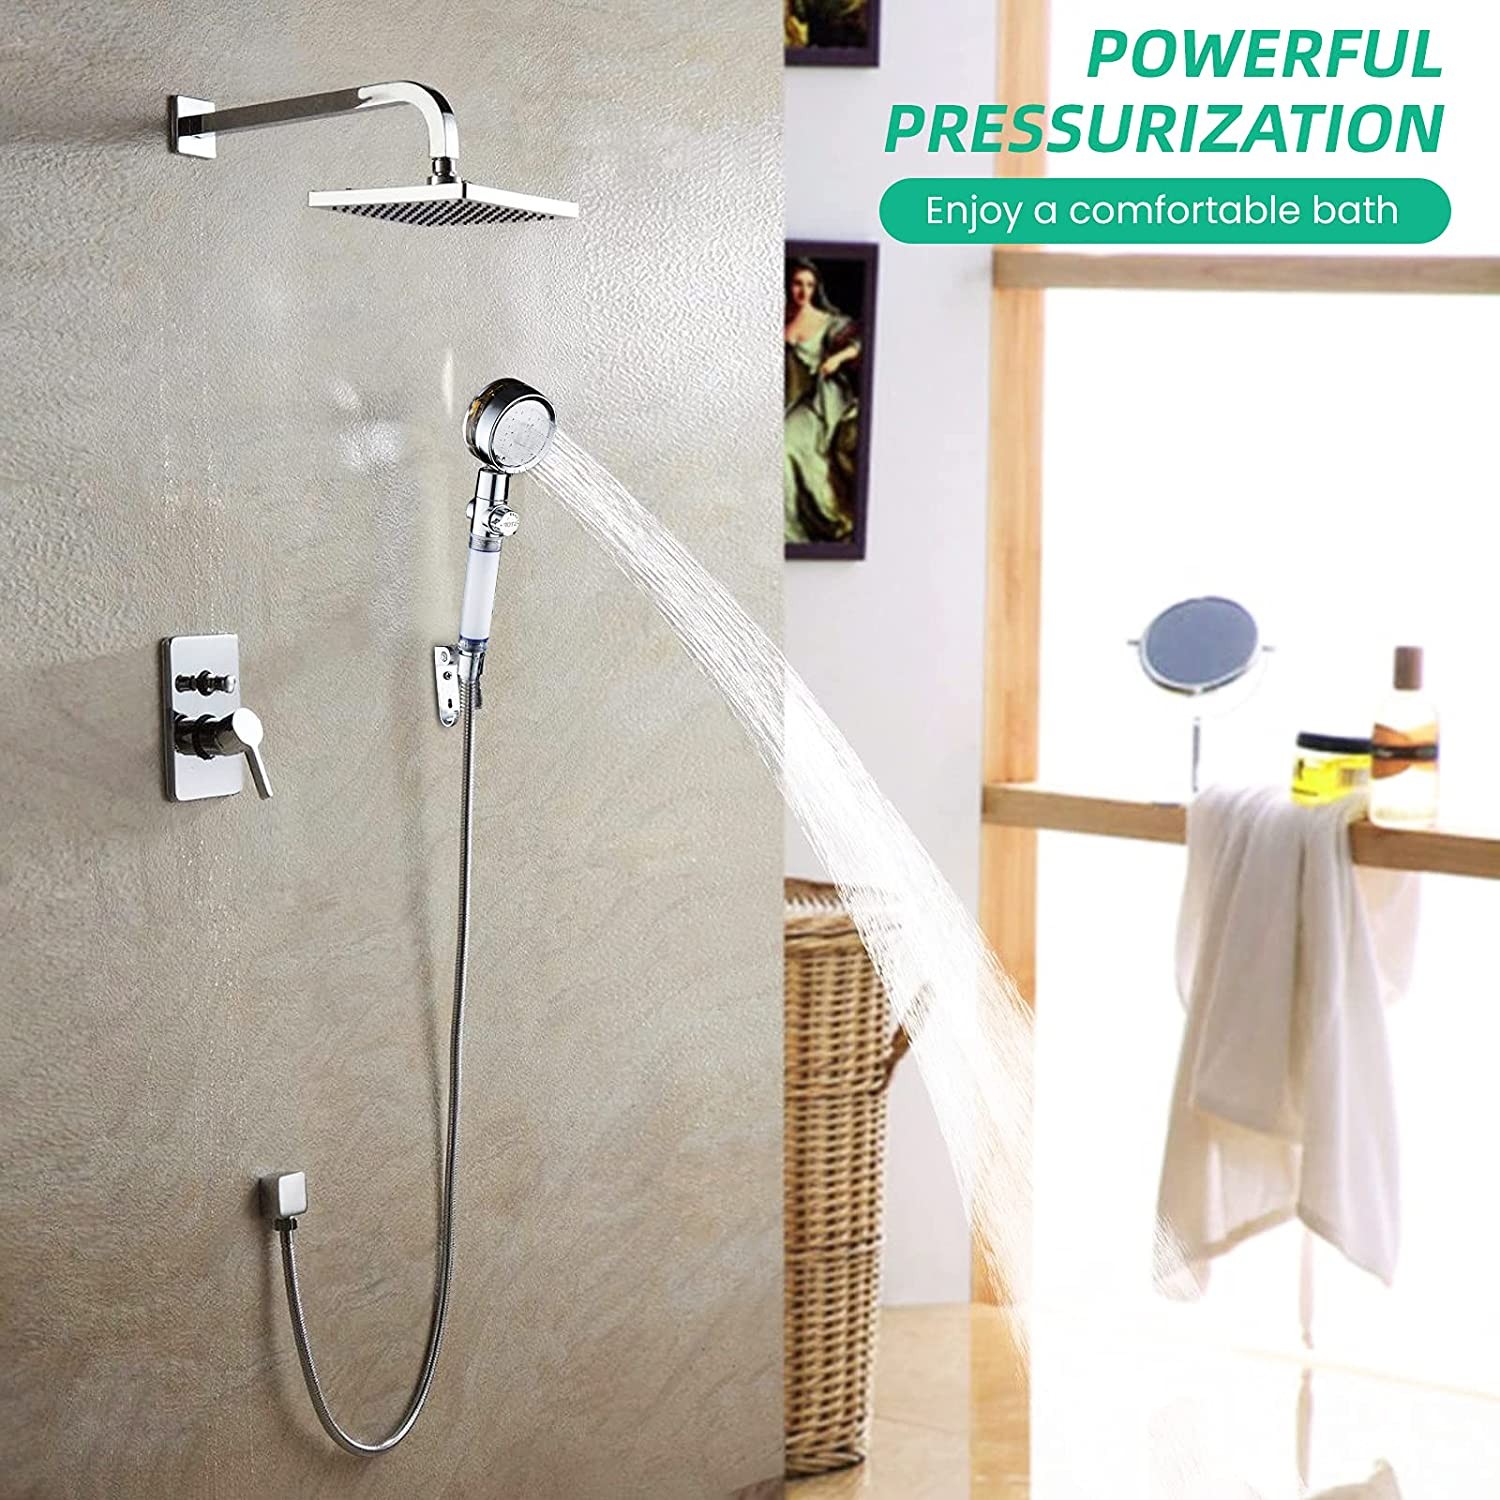 Turbo Fan Water-saving Shower Head and Stand High Reassure Rainfall Shower with Fan Bathroom Accessories